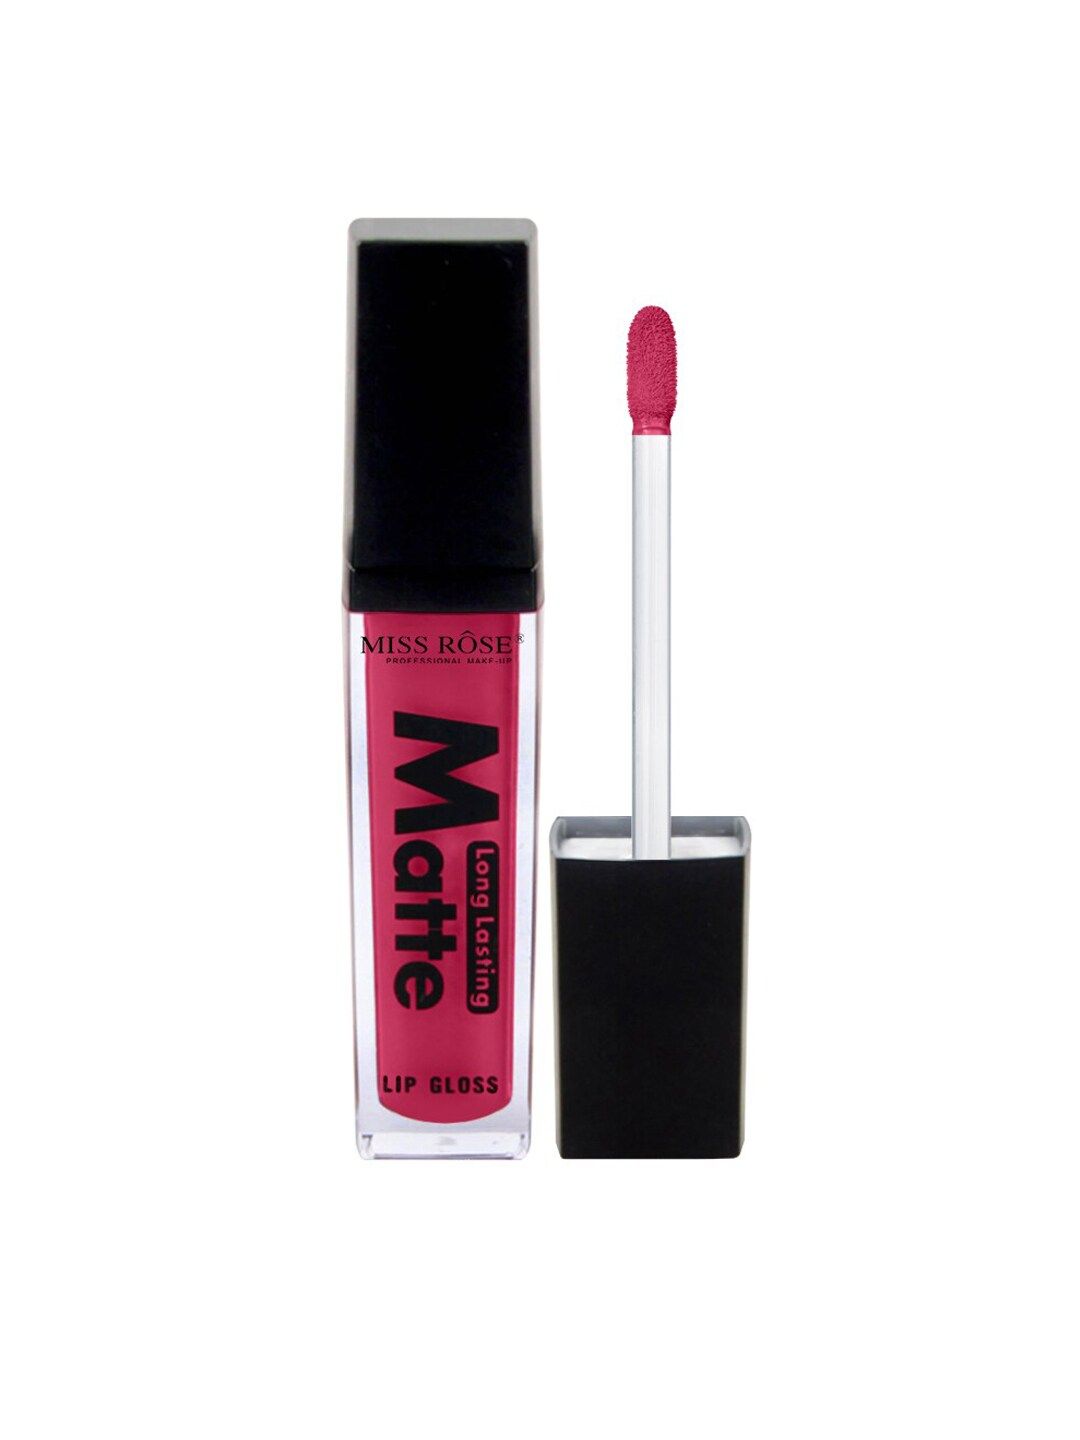 MISS ROSE Matte Long Lasting LipGloss 7701-002M 13 20 gm Price in India